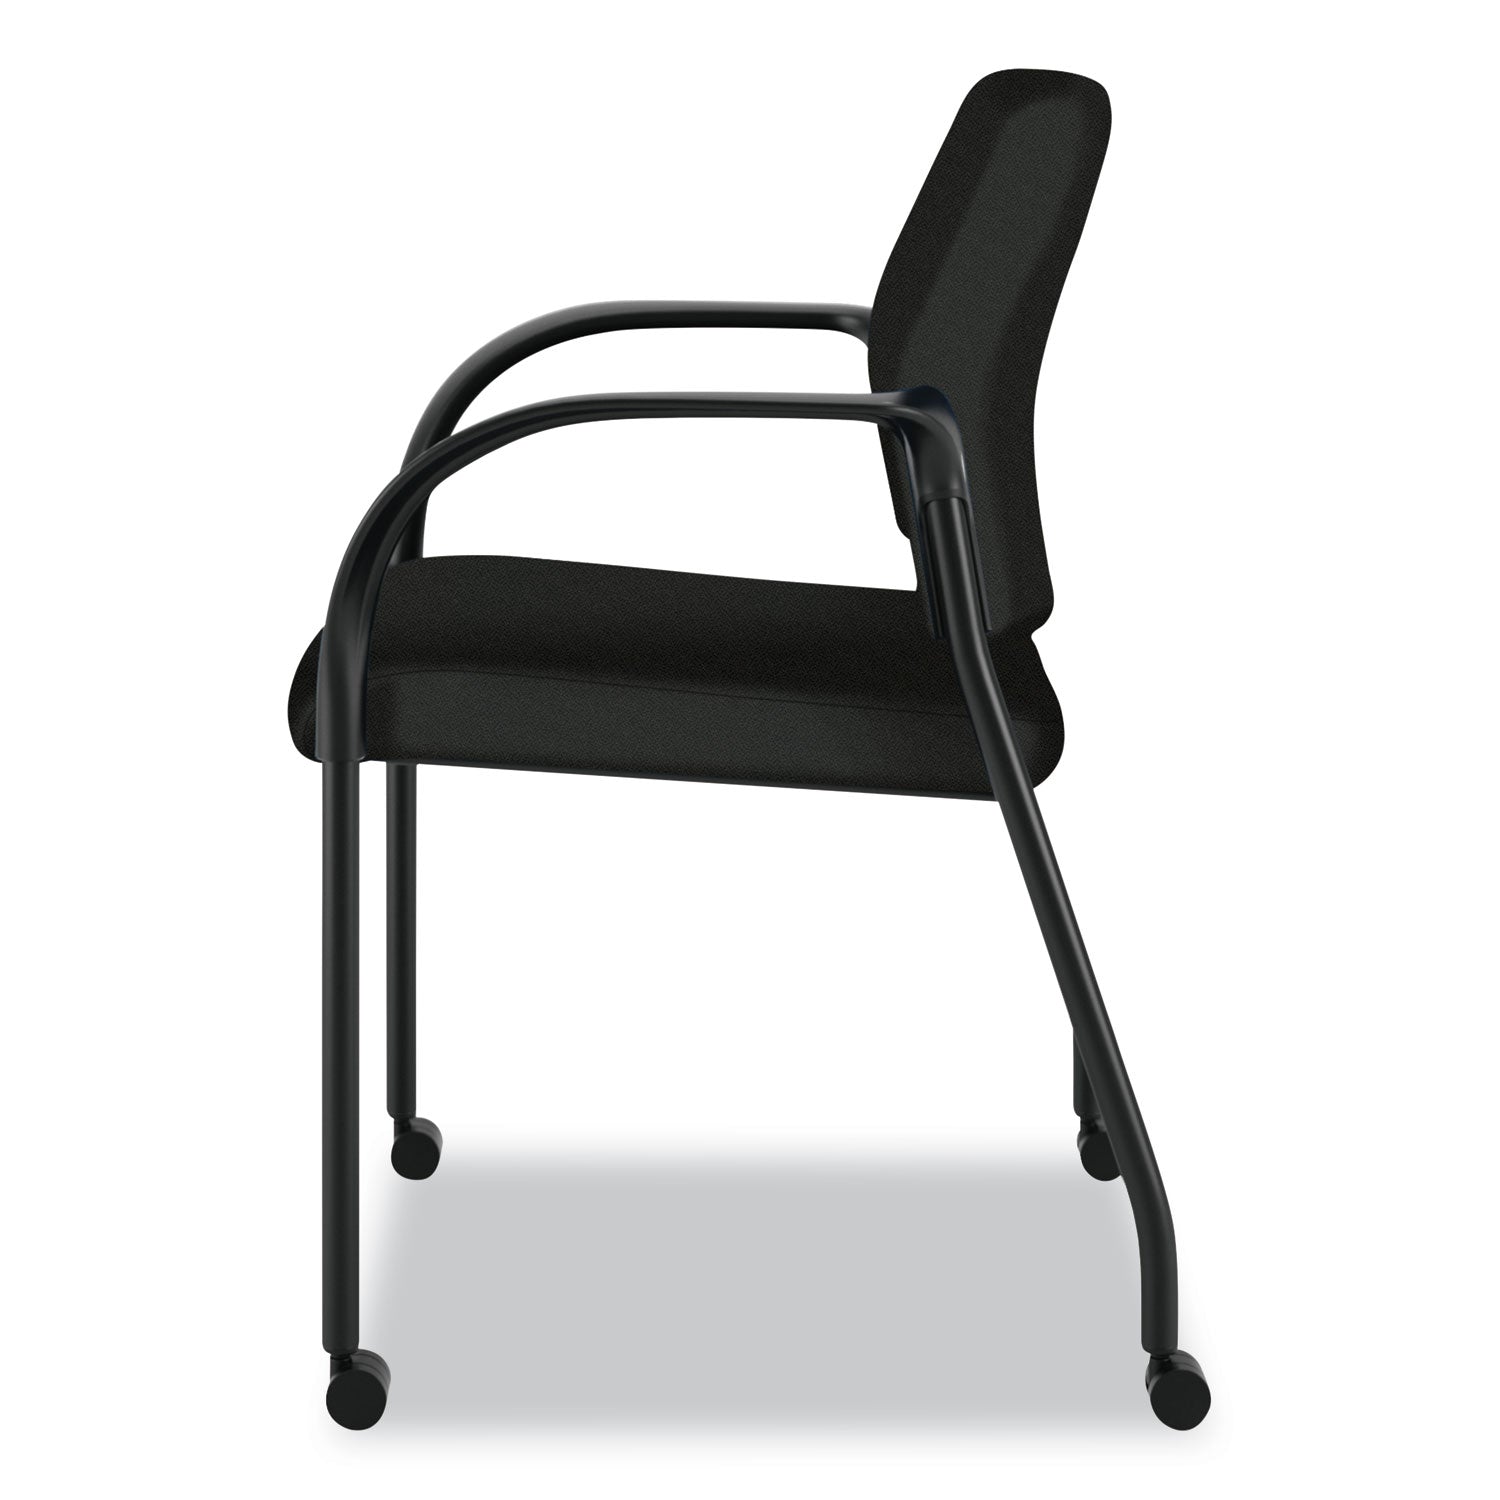 ignition-series-guest-chair-with-arms-polyester-fabric-seat-25-x-2175-x-335-black-ships-in-7-10-business-days_honis109hcu10 - 2